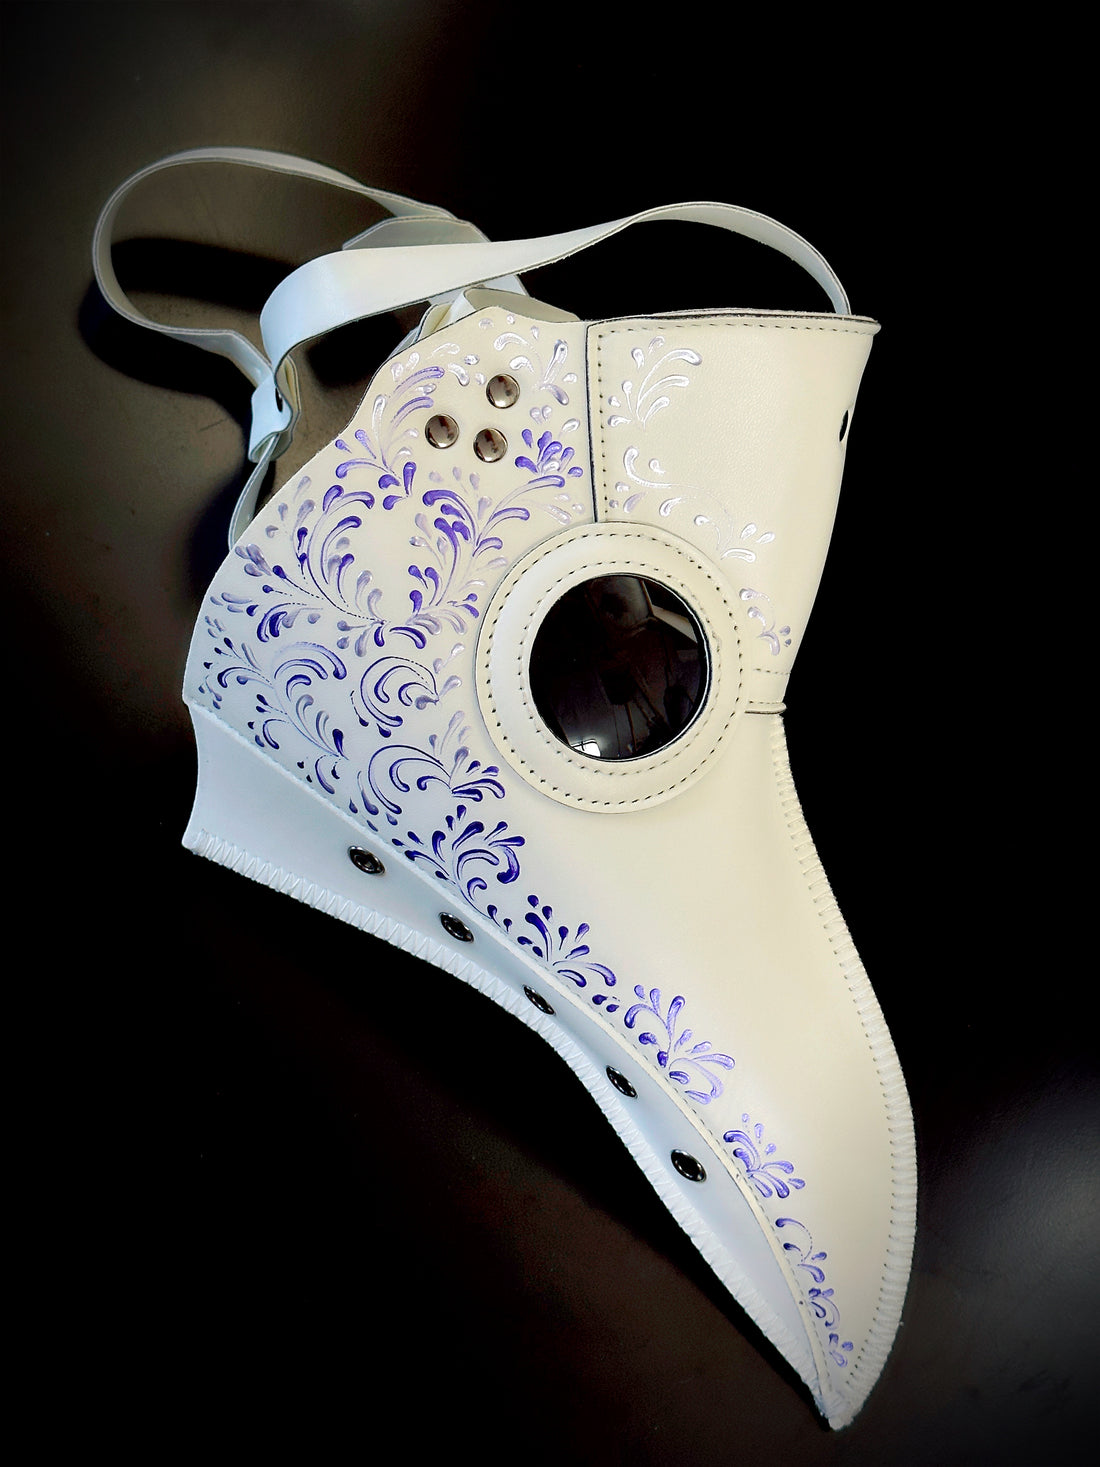 White plague mask with purple filigree for sale.